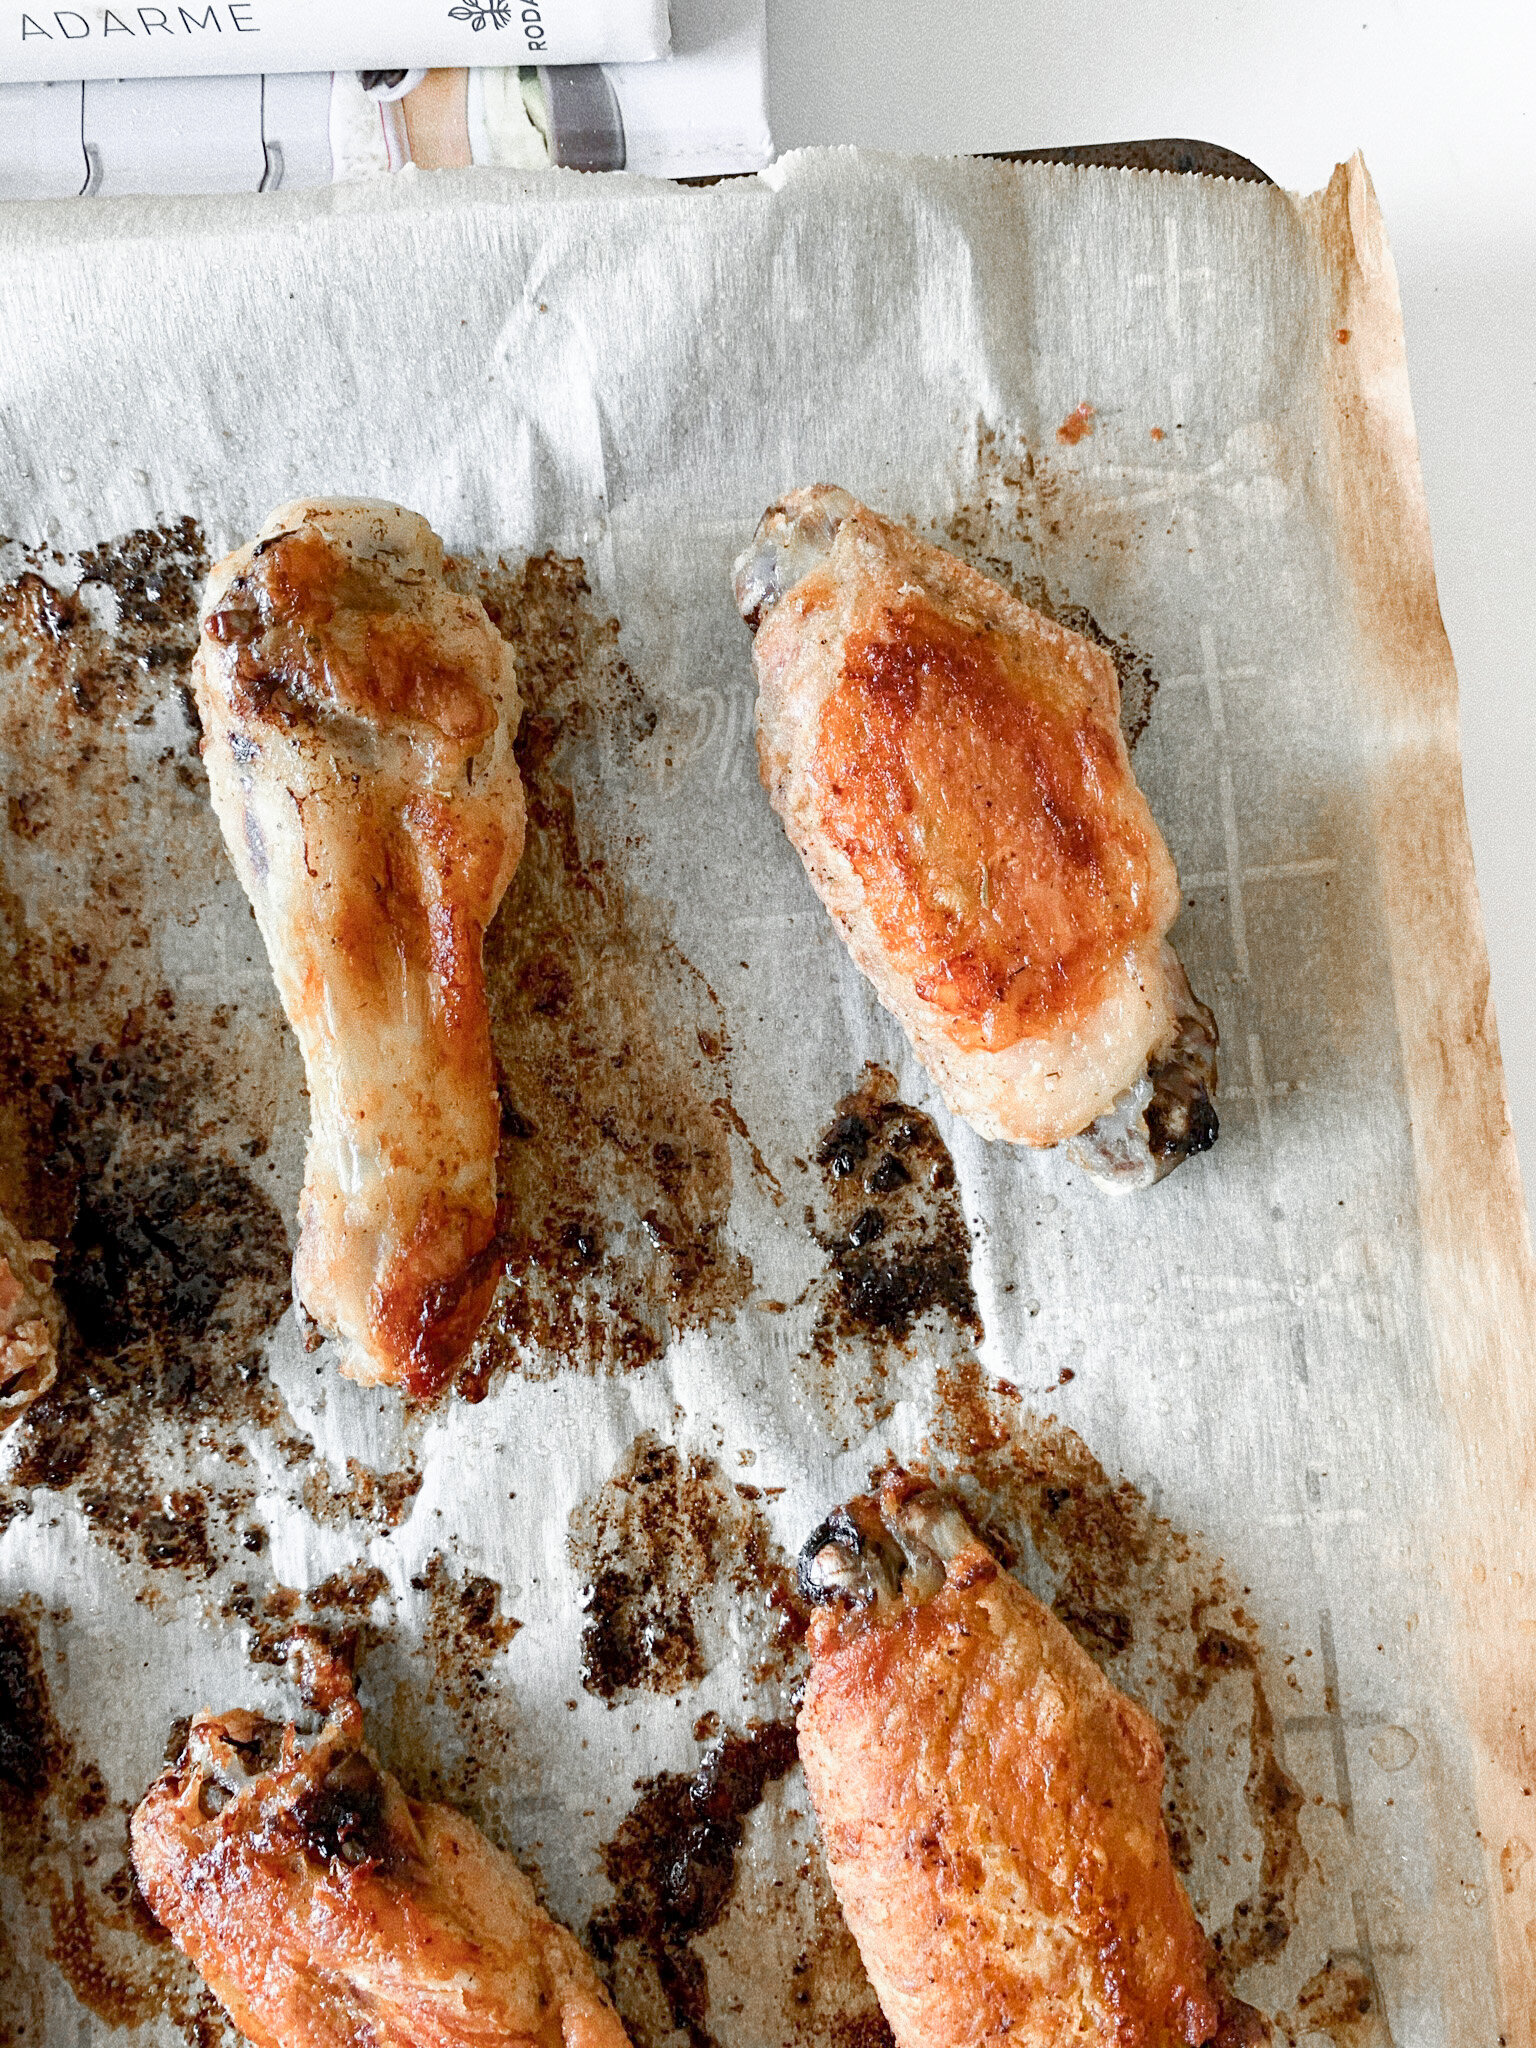 Freshly baked chicken wings on a parchment lined baking sheet